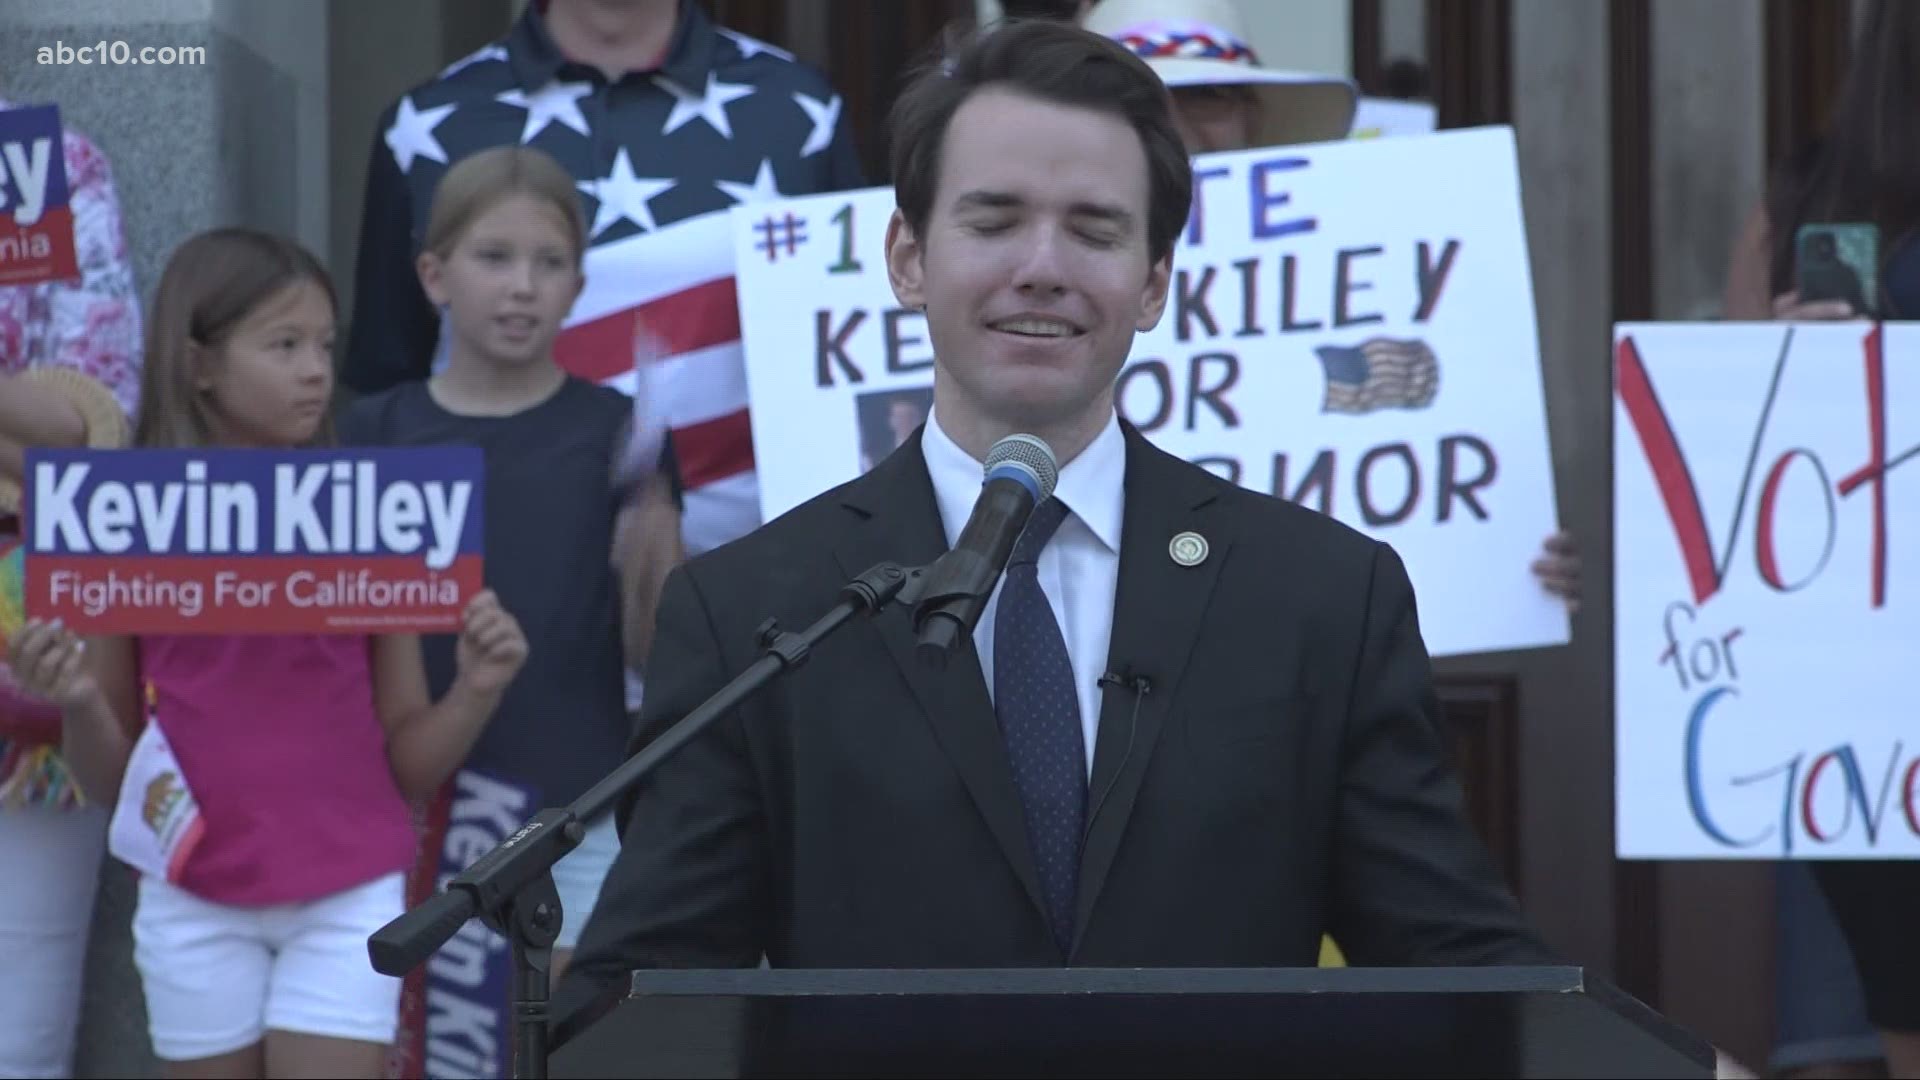 Many supporters watched from the capitol steps as California Republican Assemblyman Kevin Kiley spoke about the issues facing the state.